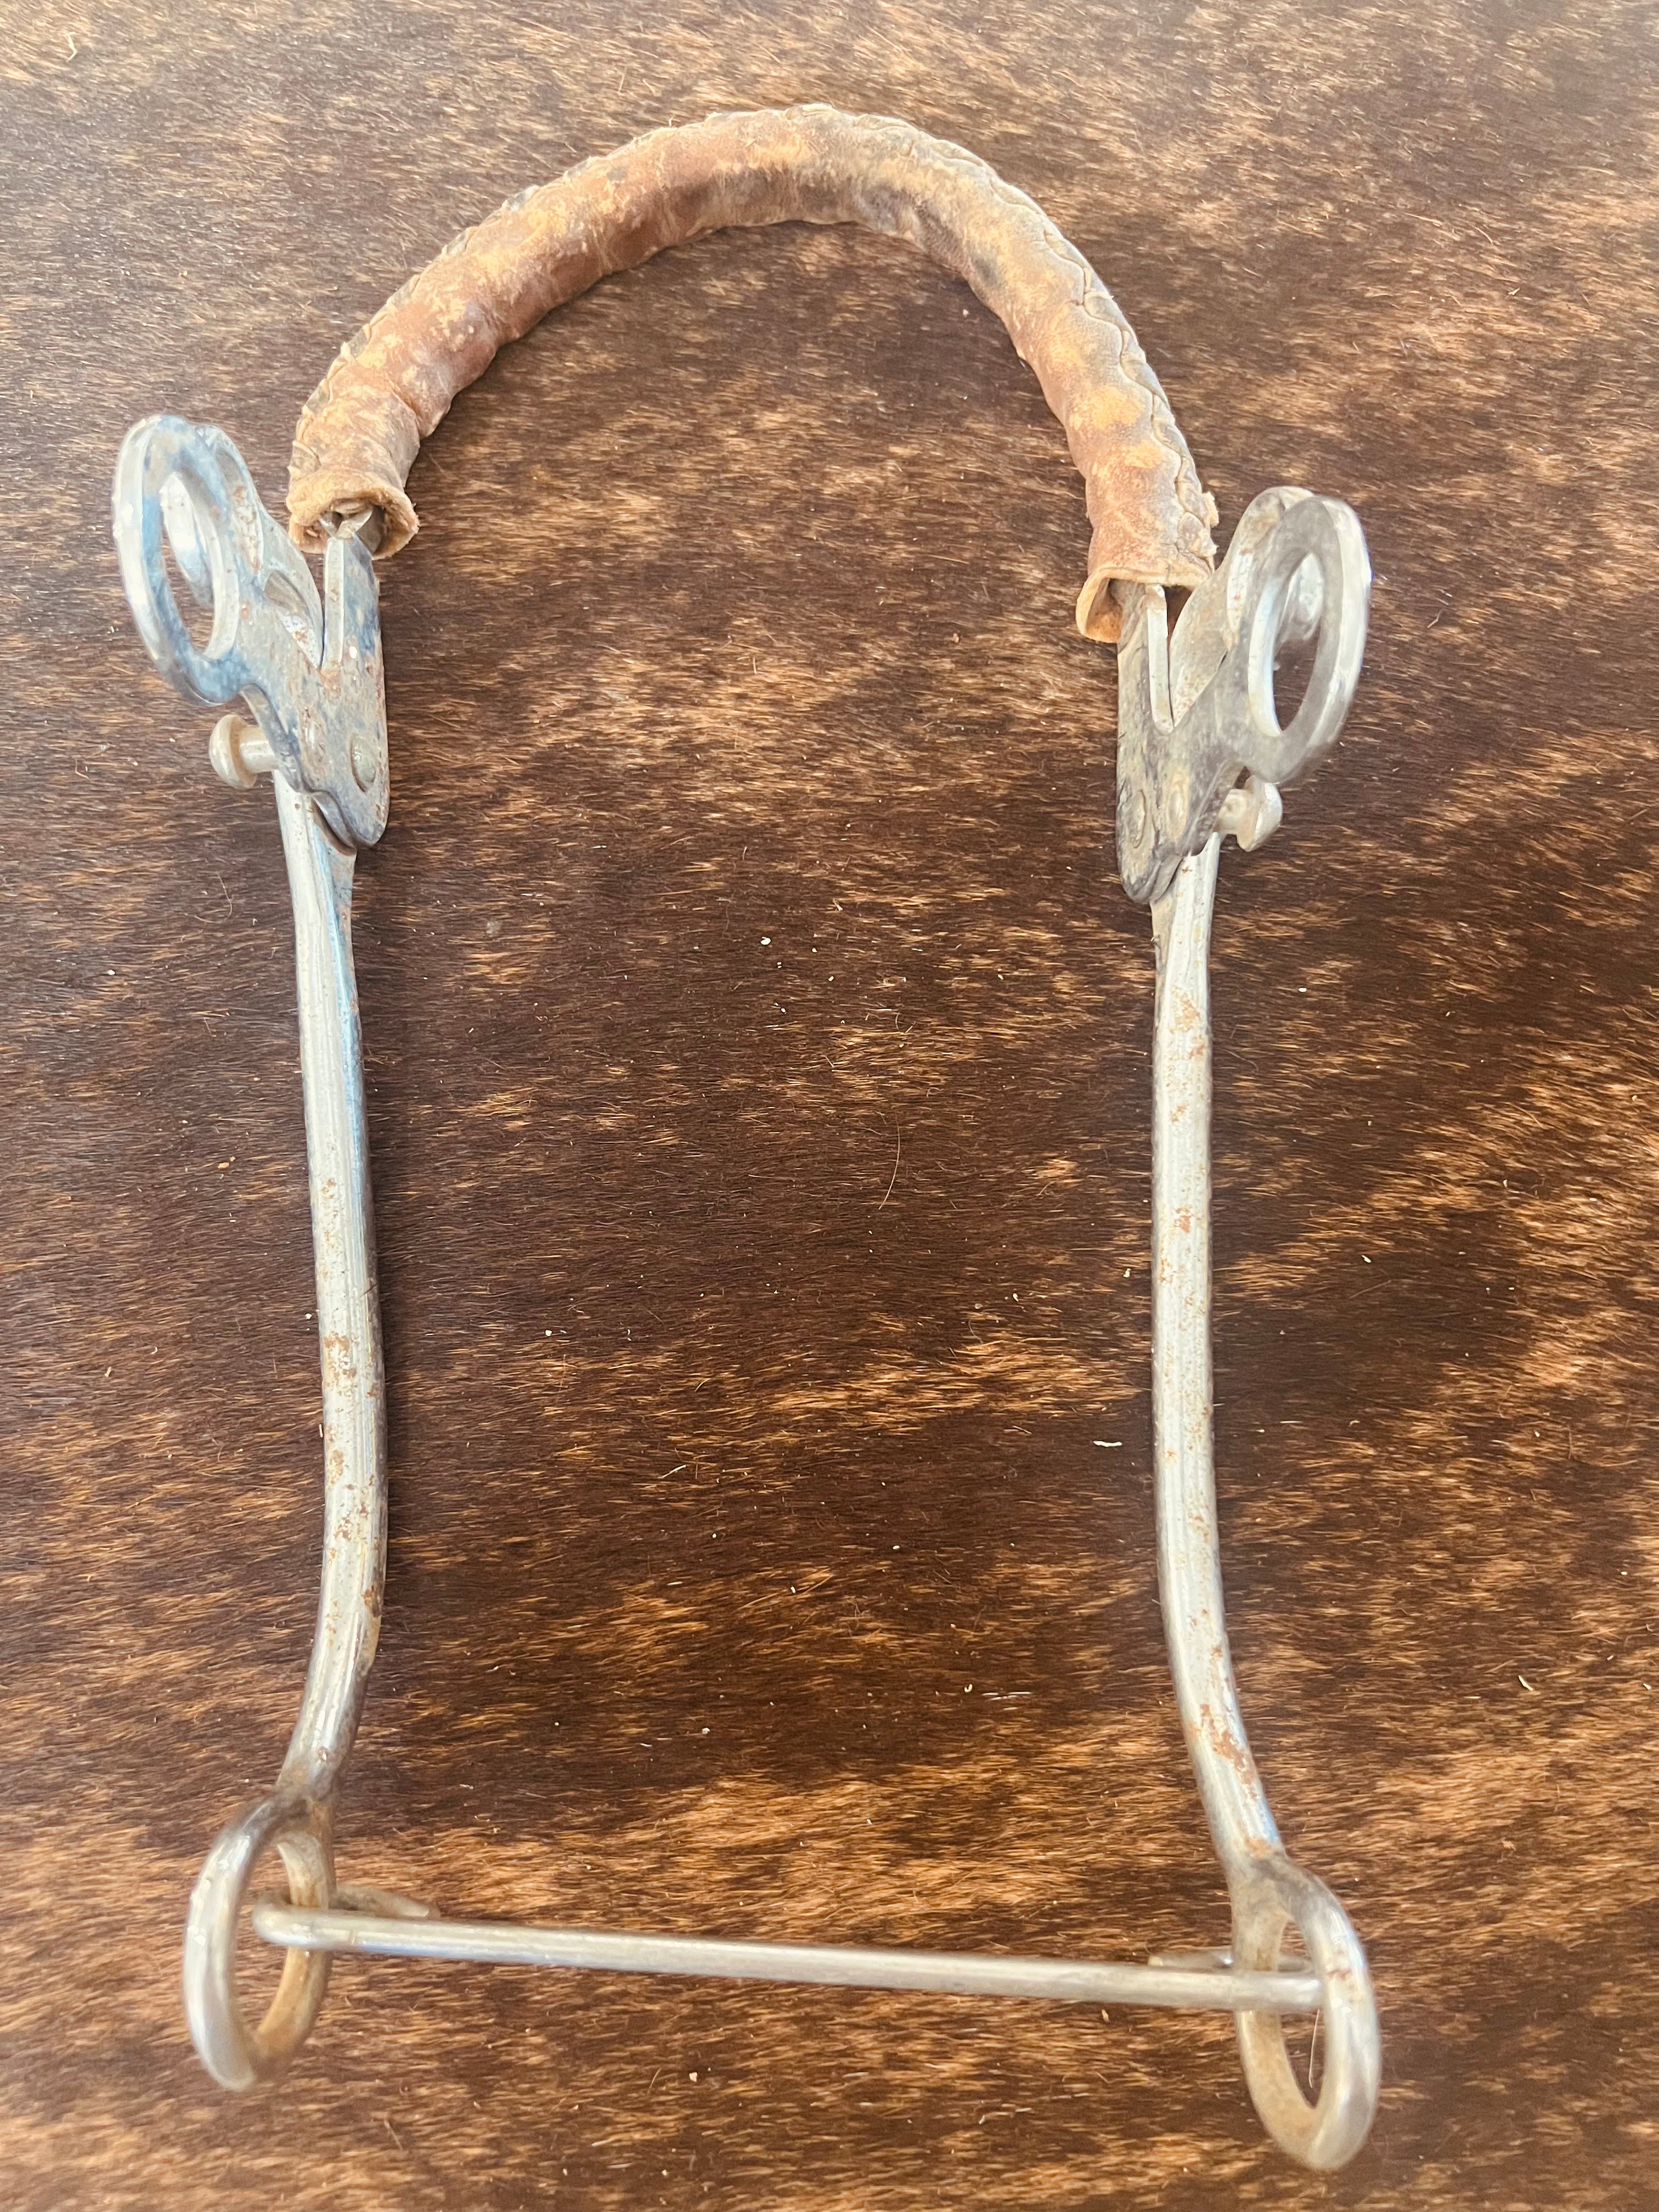 Kelly Mechanical Hackamore with Leather Noseband